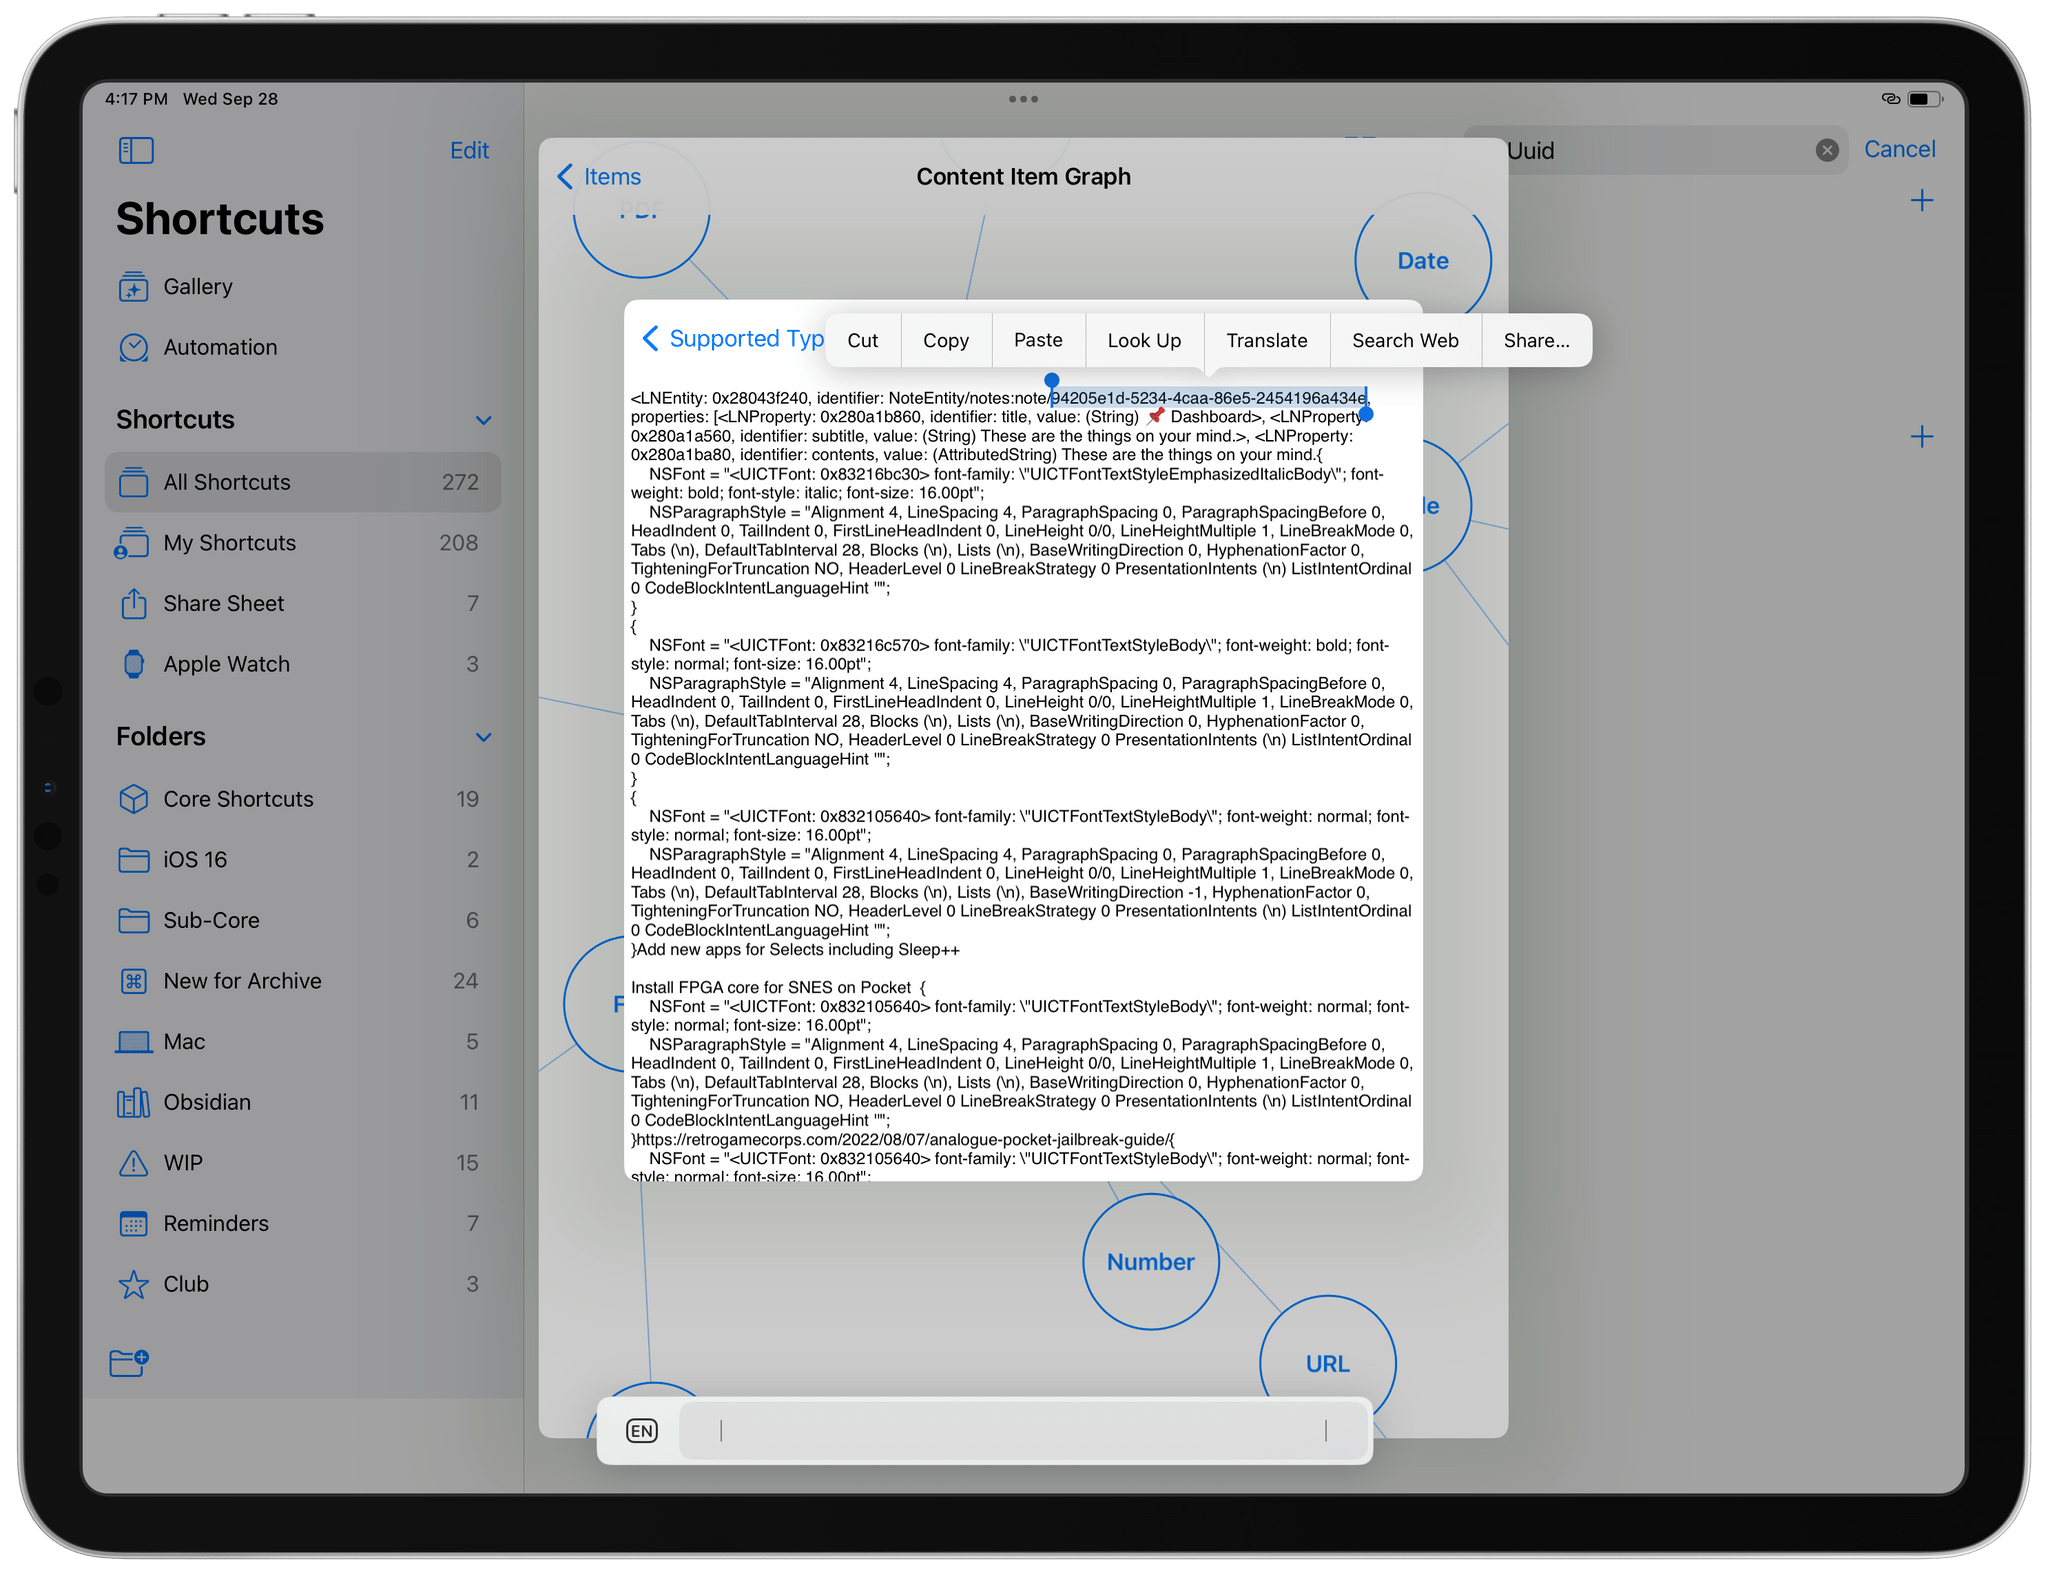 Once again, this part is the UUID of a note. Select it and copy it to the clipboard. This is the only way to get this detail out of Shortcuts.